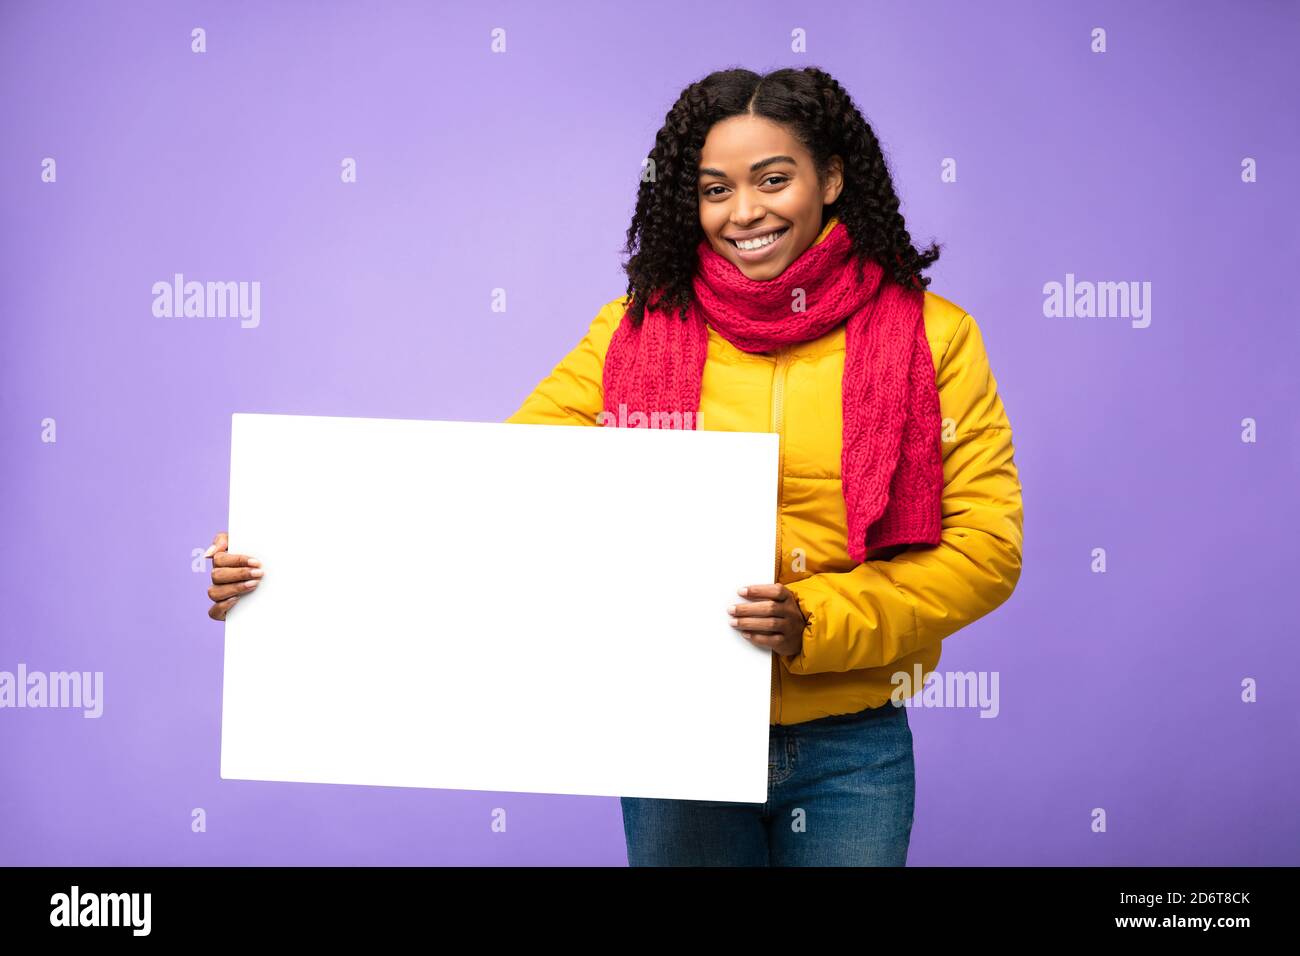 African American Woman Holding Blank Board Posing Over Purple Background Stock Photo